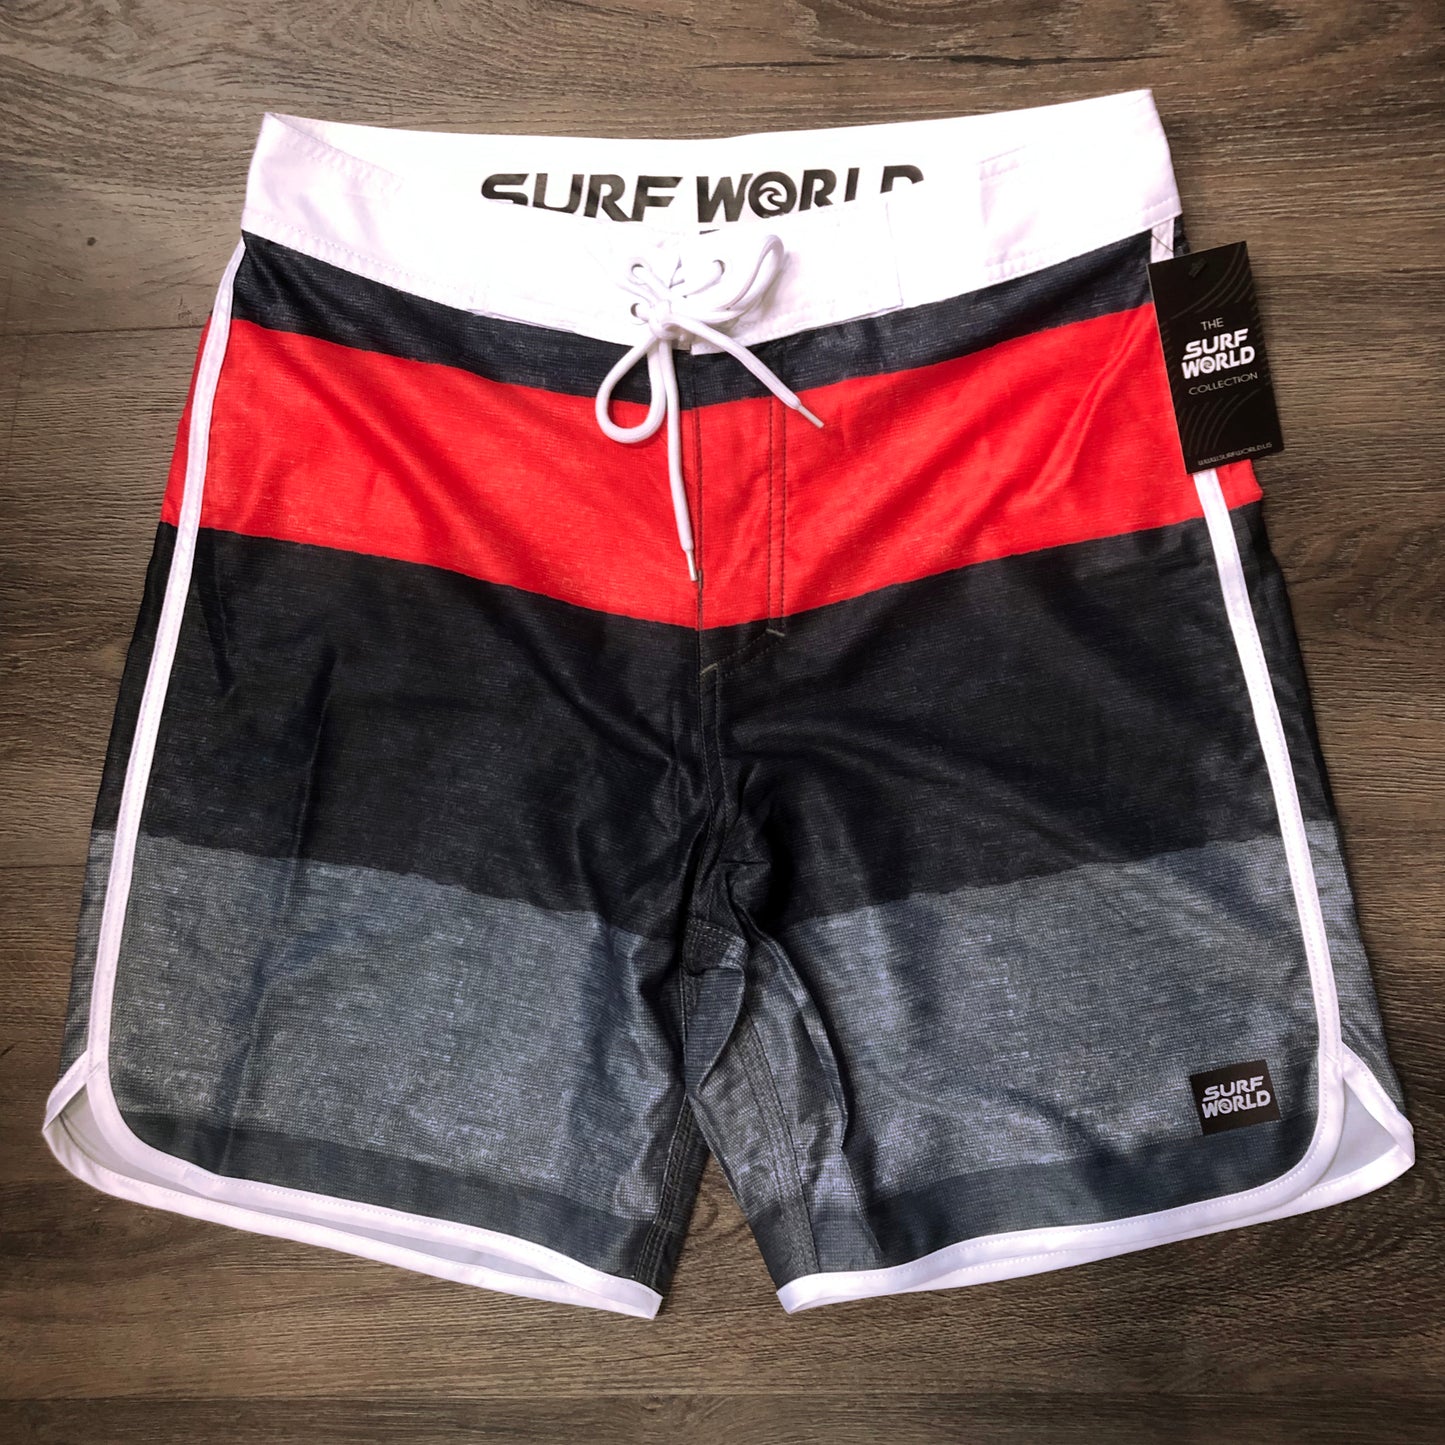 Surf World Ocean Mile Boardshorts - The Surf World Collection - Navy Teal Mens Boardshorts Nvy/Org